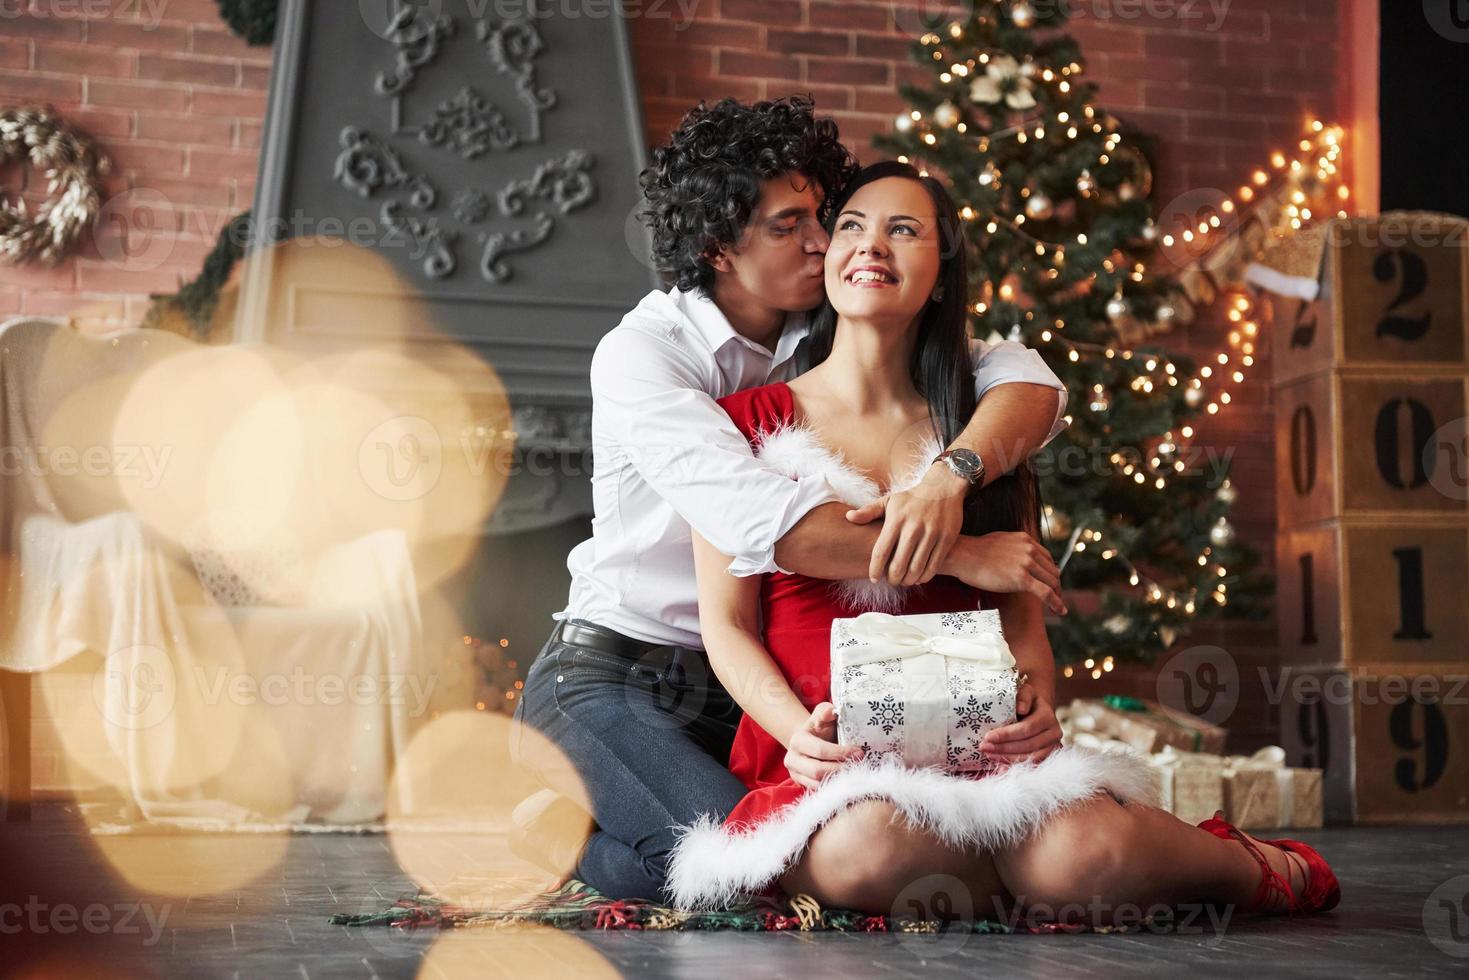 Guy gives a kiss for his woman. Beautiful couple celebrating New year in the decorated room with Christmas tree and fireplace behind photo